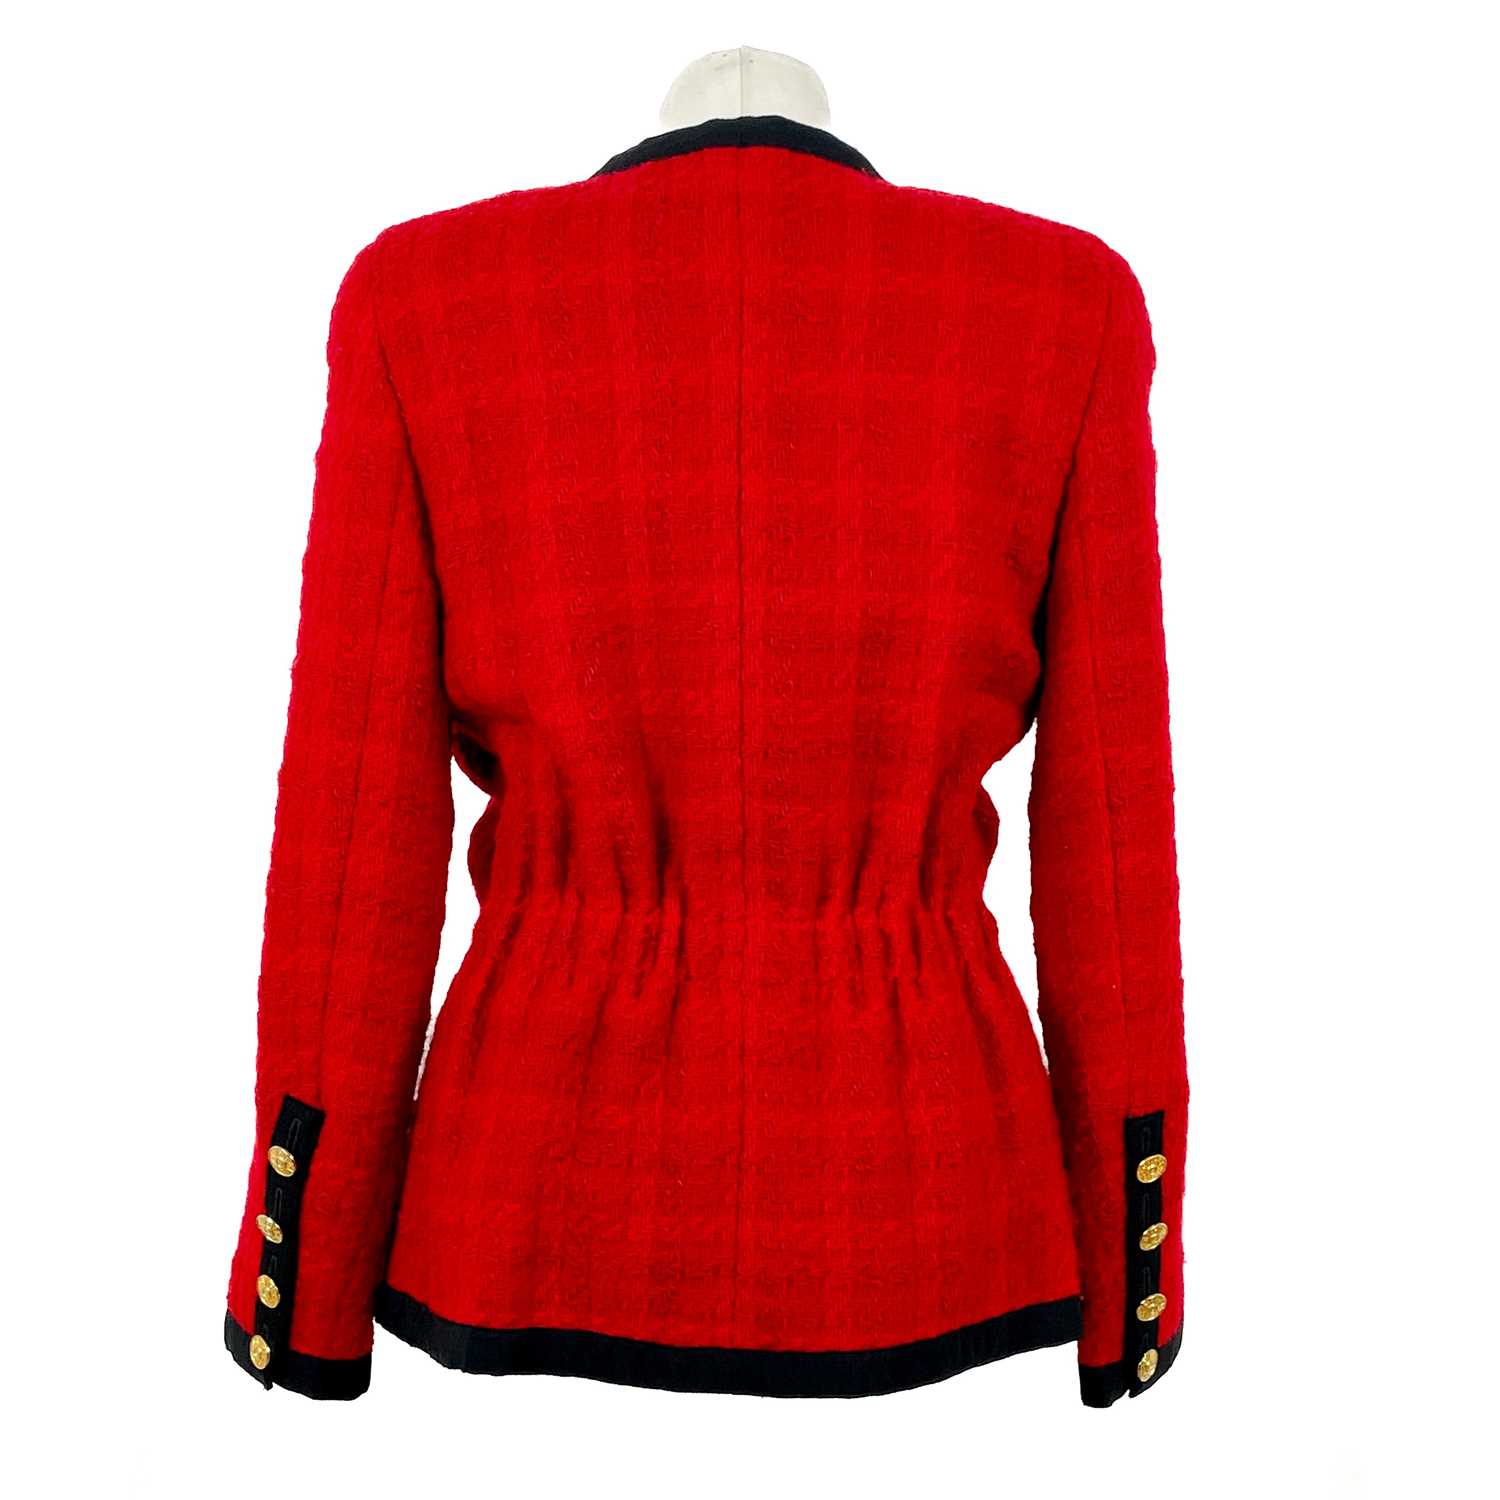 A Chanel 1980's red boucle jacket with gold plated buttons and black trim. - Image 4 of 9